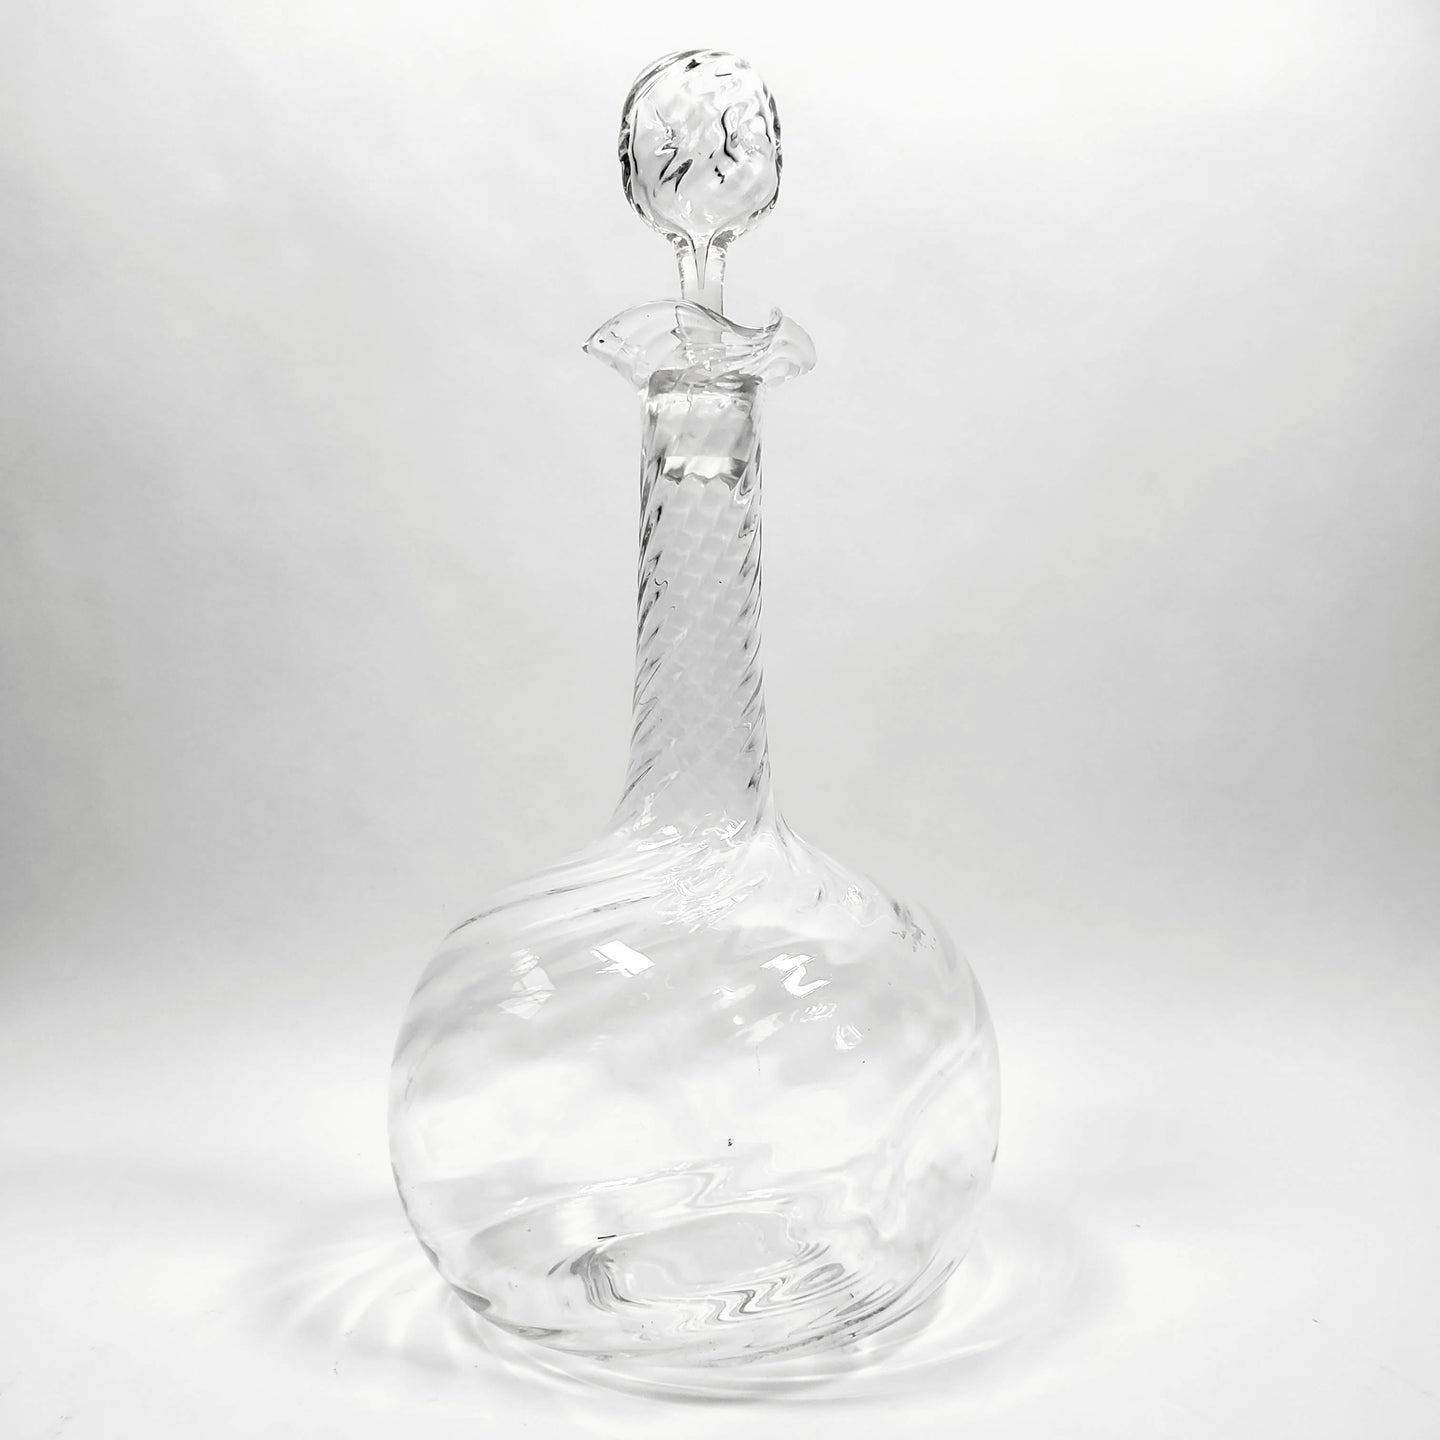 Vintage Glass Decanter with Ruffle Edge Hand Blown Glass.